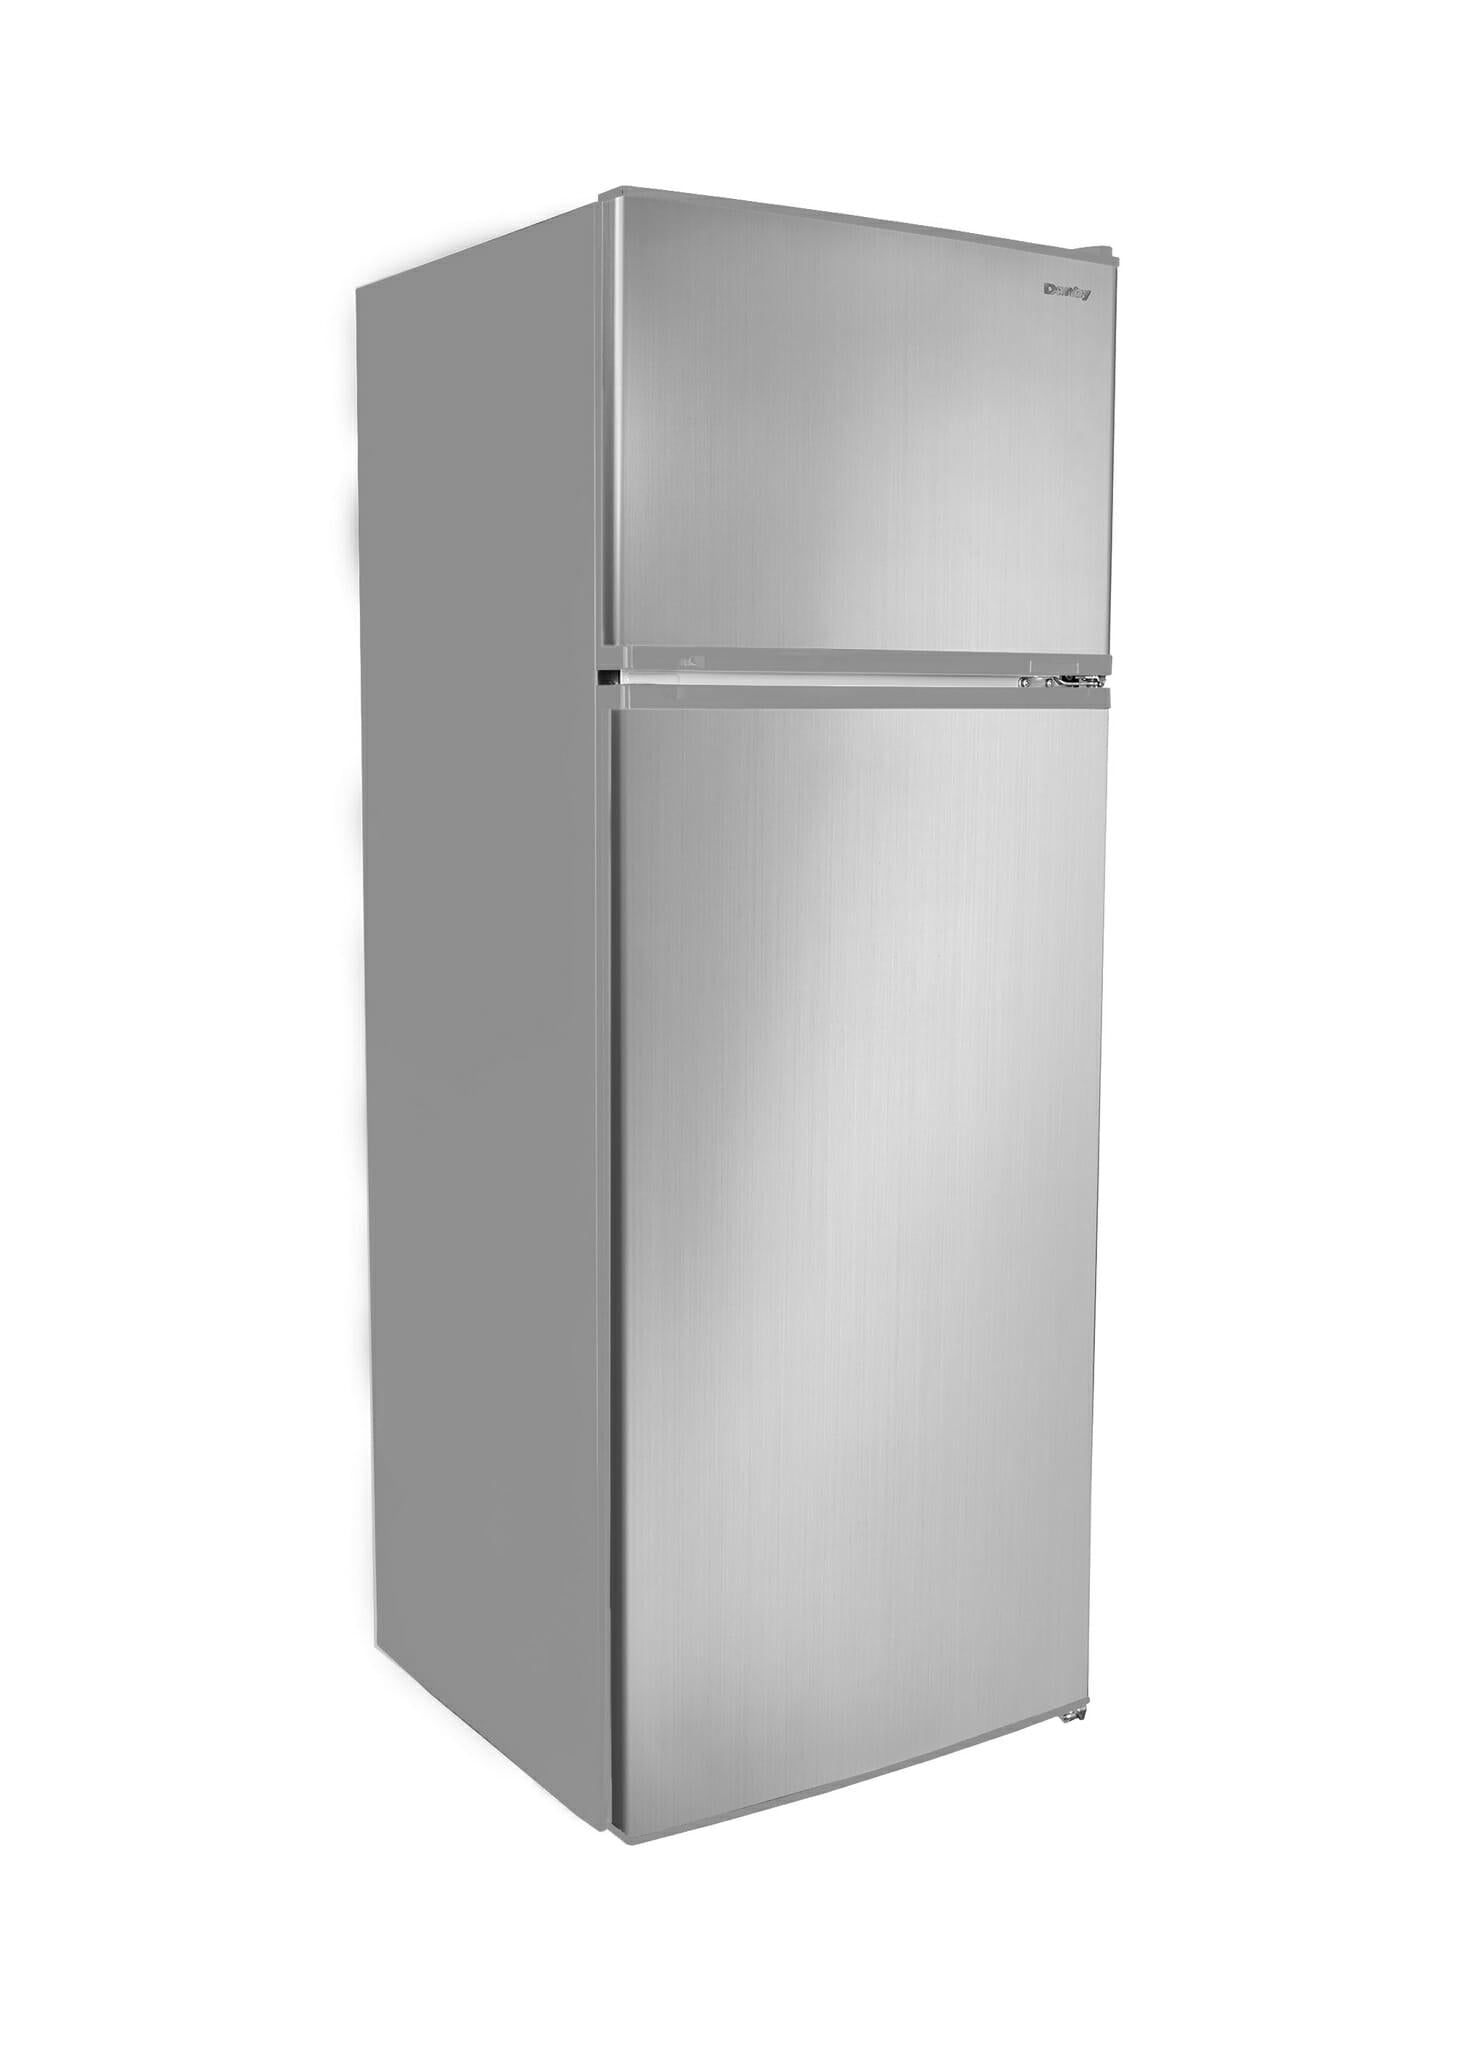 Danby 7.4 cu. ft. Partial Defrost Fridge in Stainless Steel